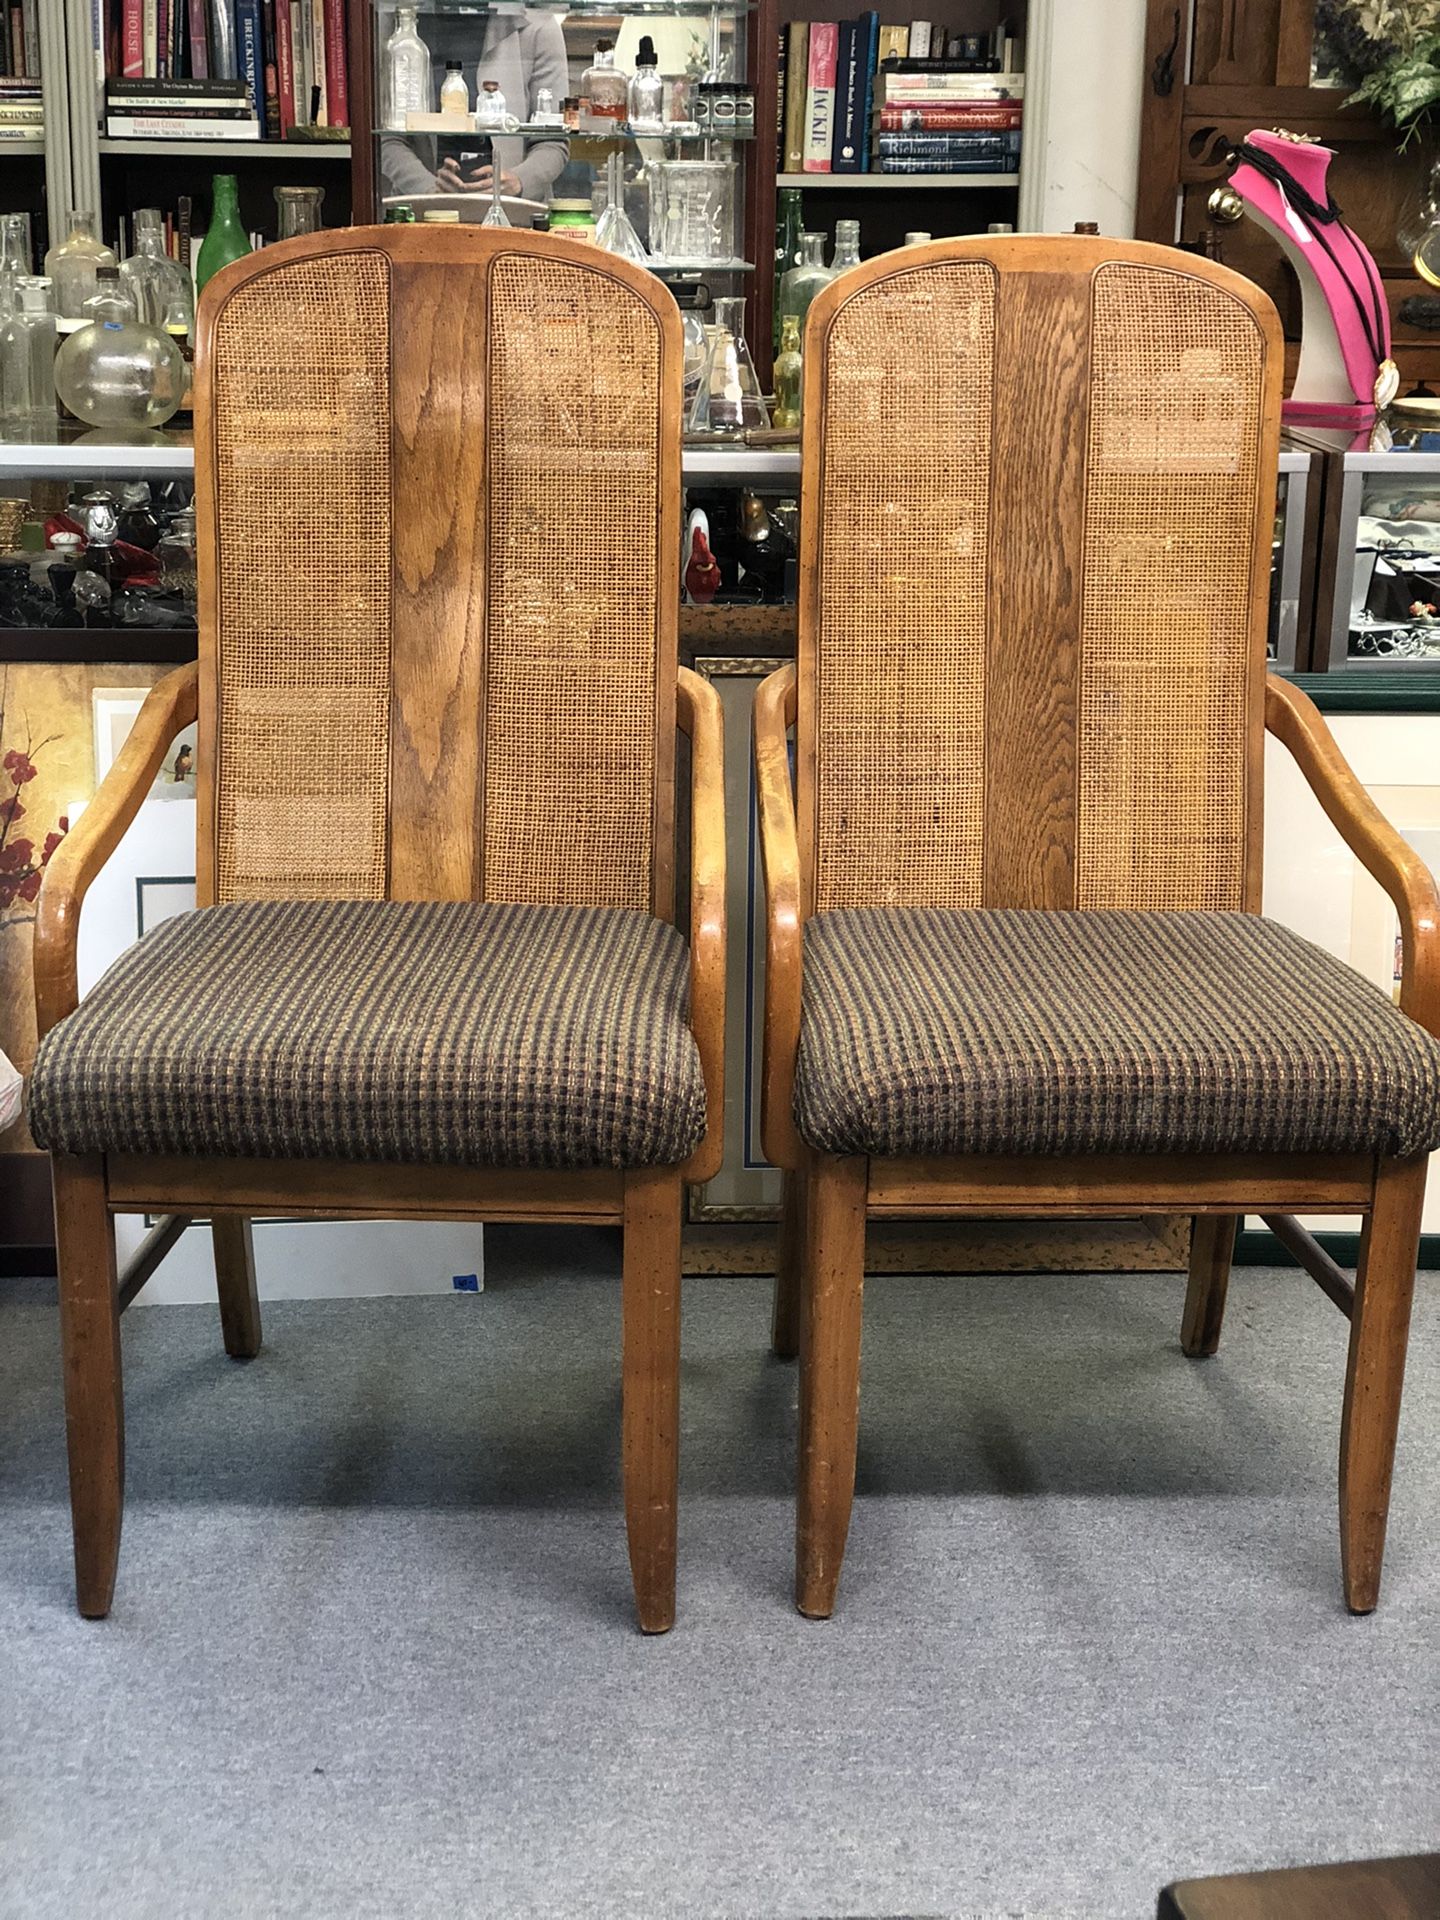 Set of wooden upholstery chairs